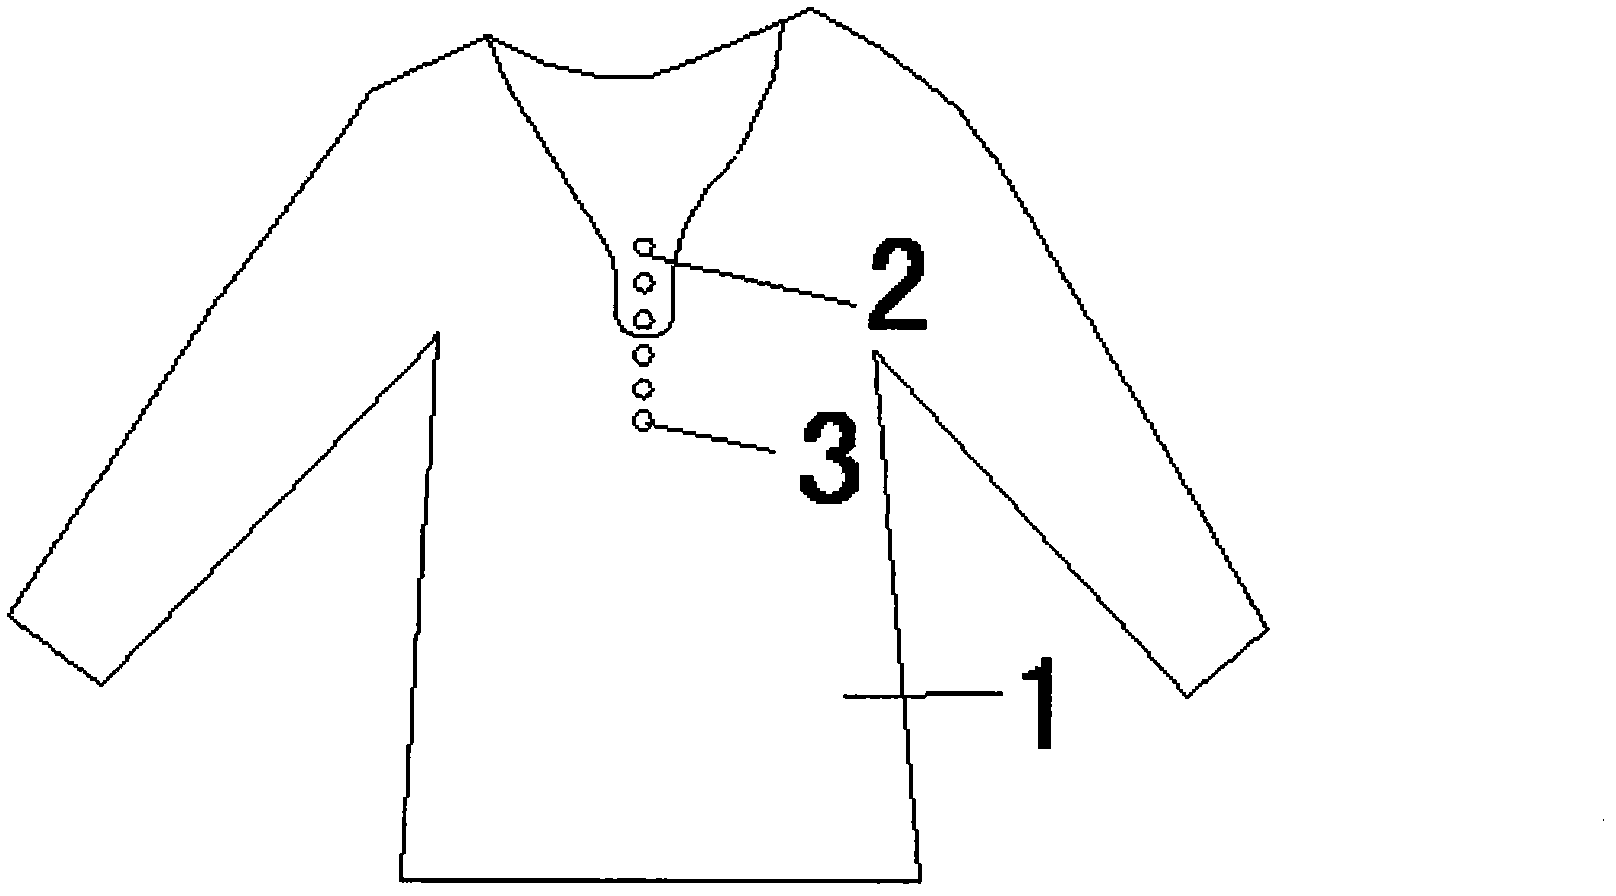 Long sleeve without being ironed frequently